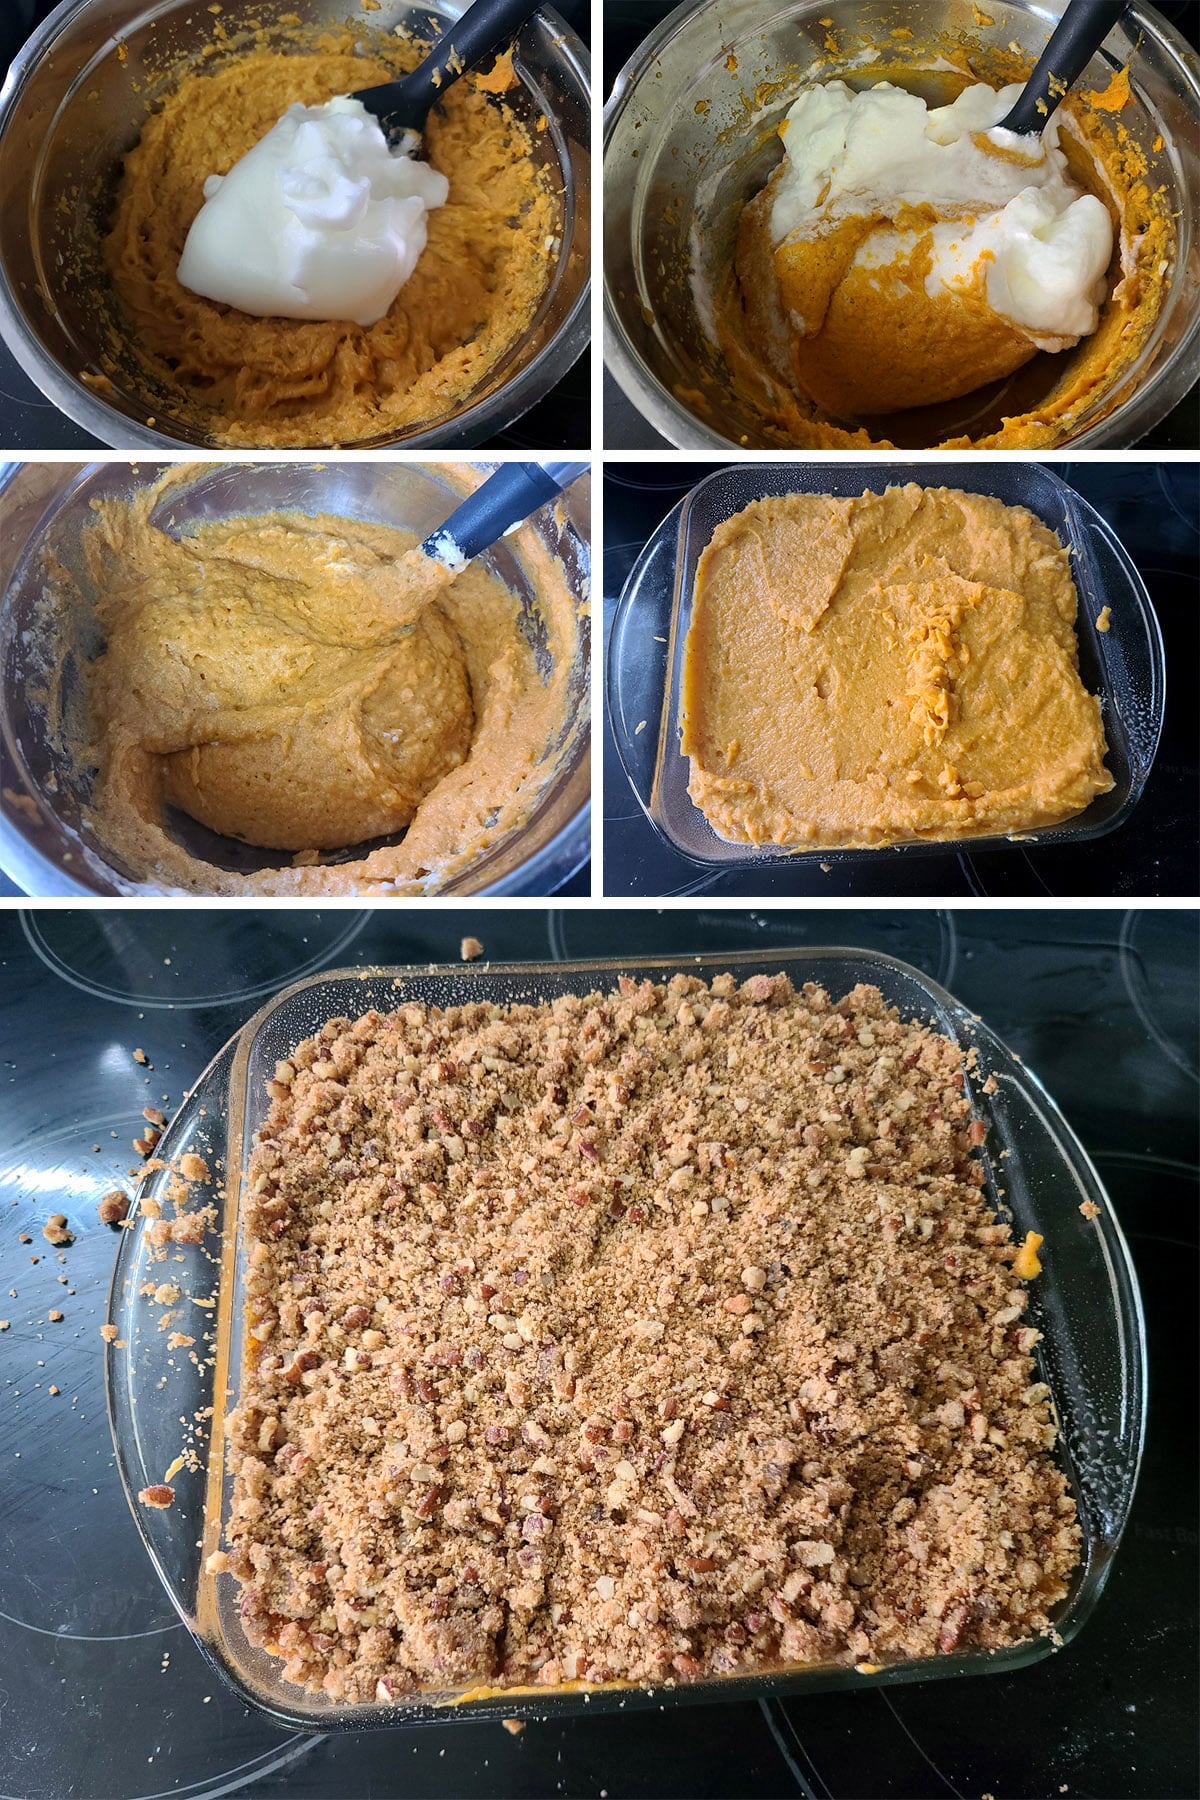 A 5 part image showing the egg whites being folded into the souffle, spread in a pan, and topped with the butter pecan mixture.